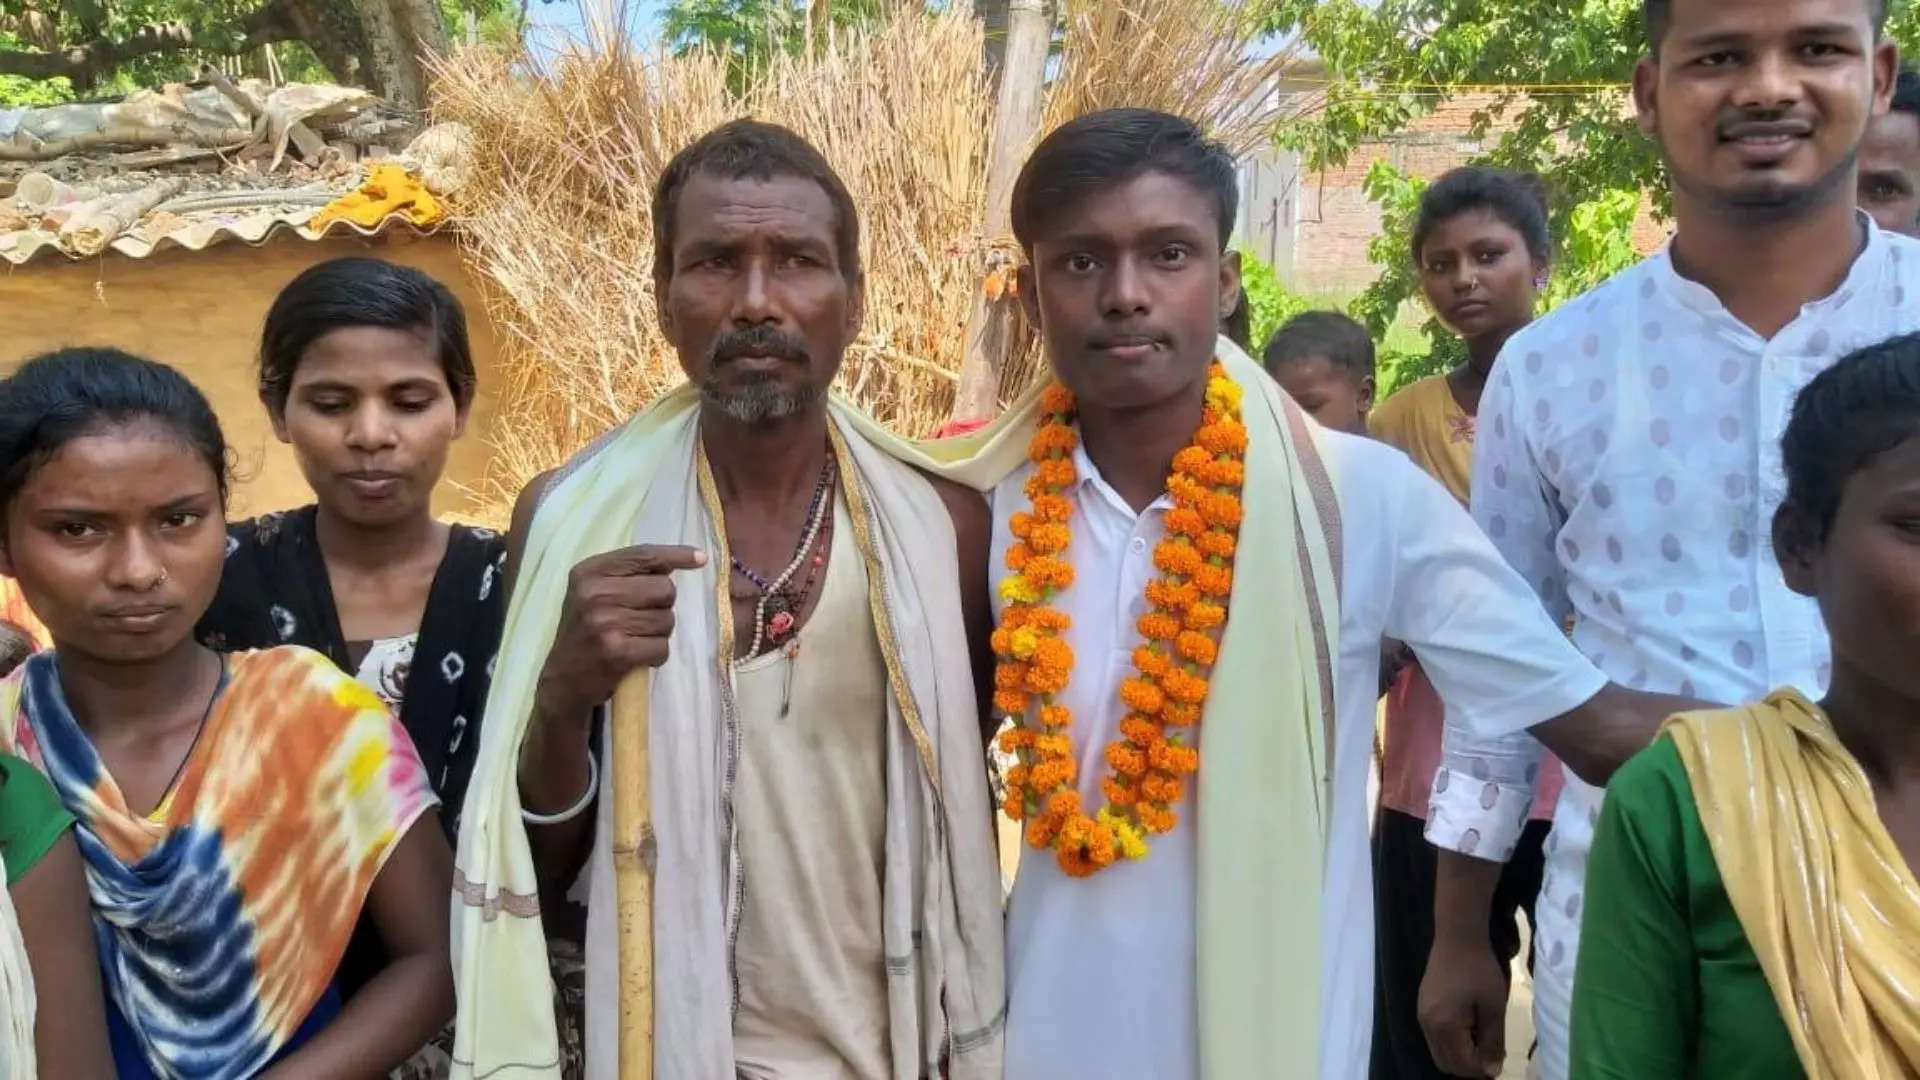 Patna Dalit boy 1 out of only 6 in the world to win a Rs 25 crore scholarship to study in the US is the son of a day laborer